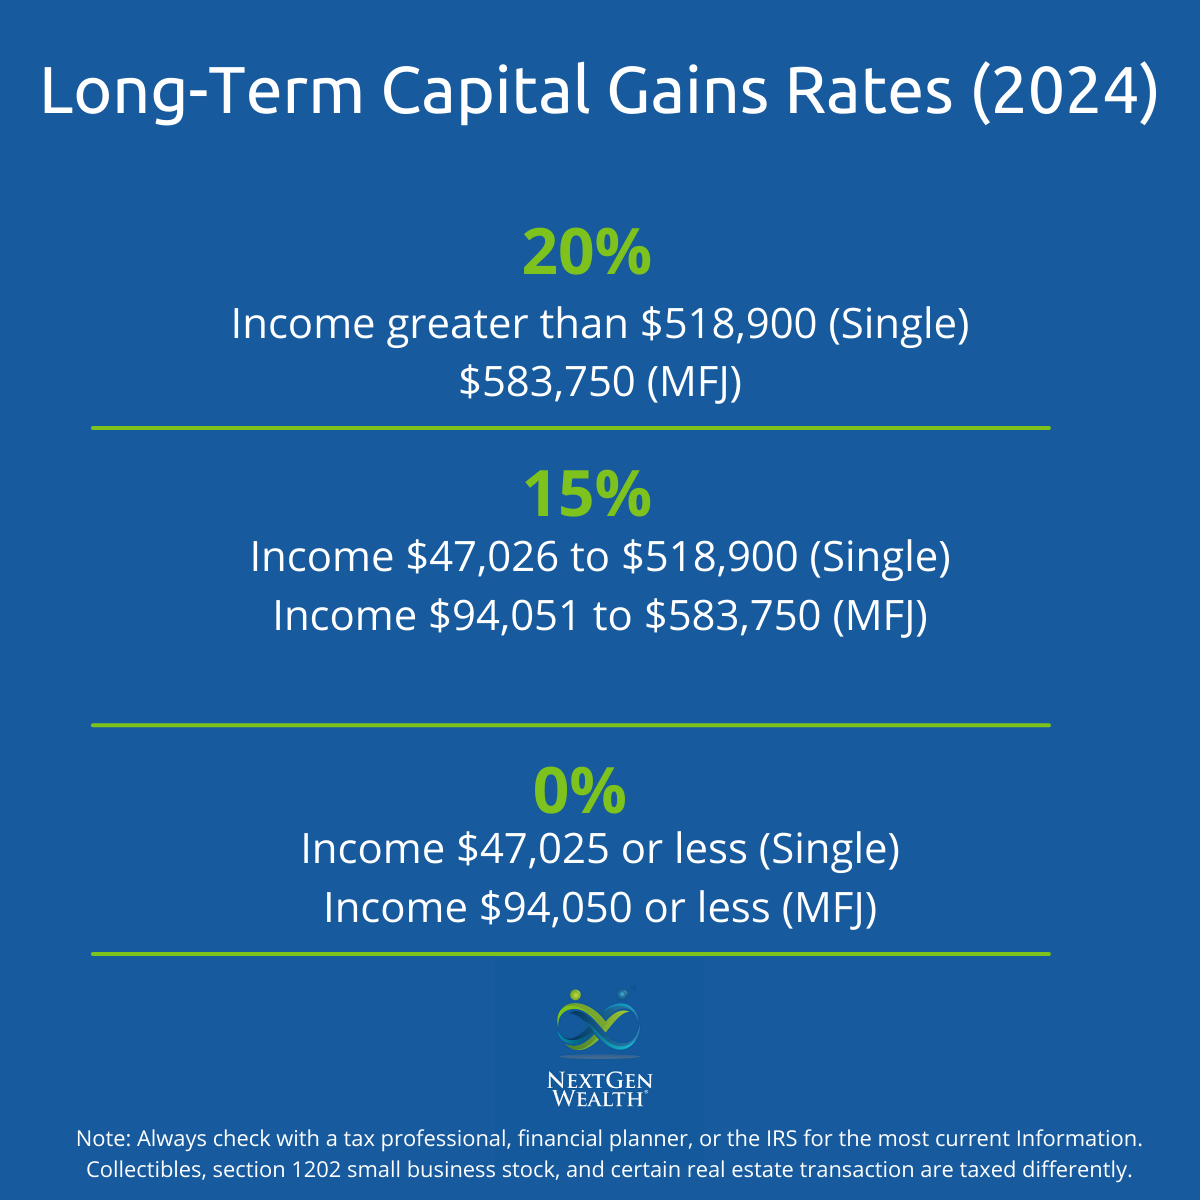 Can Capital Gains Push Me Into a Higher Tax Bracket?